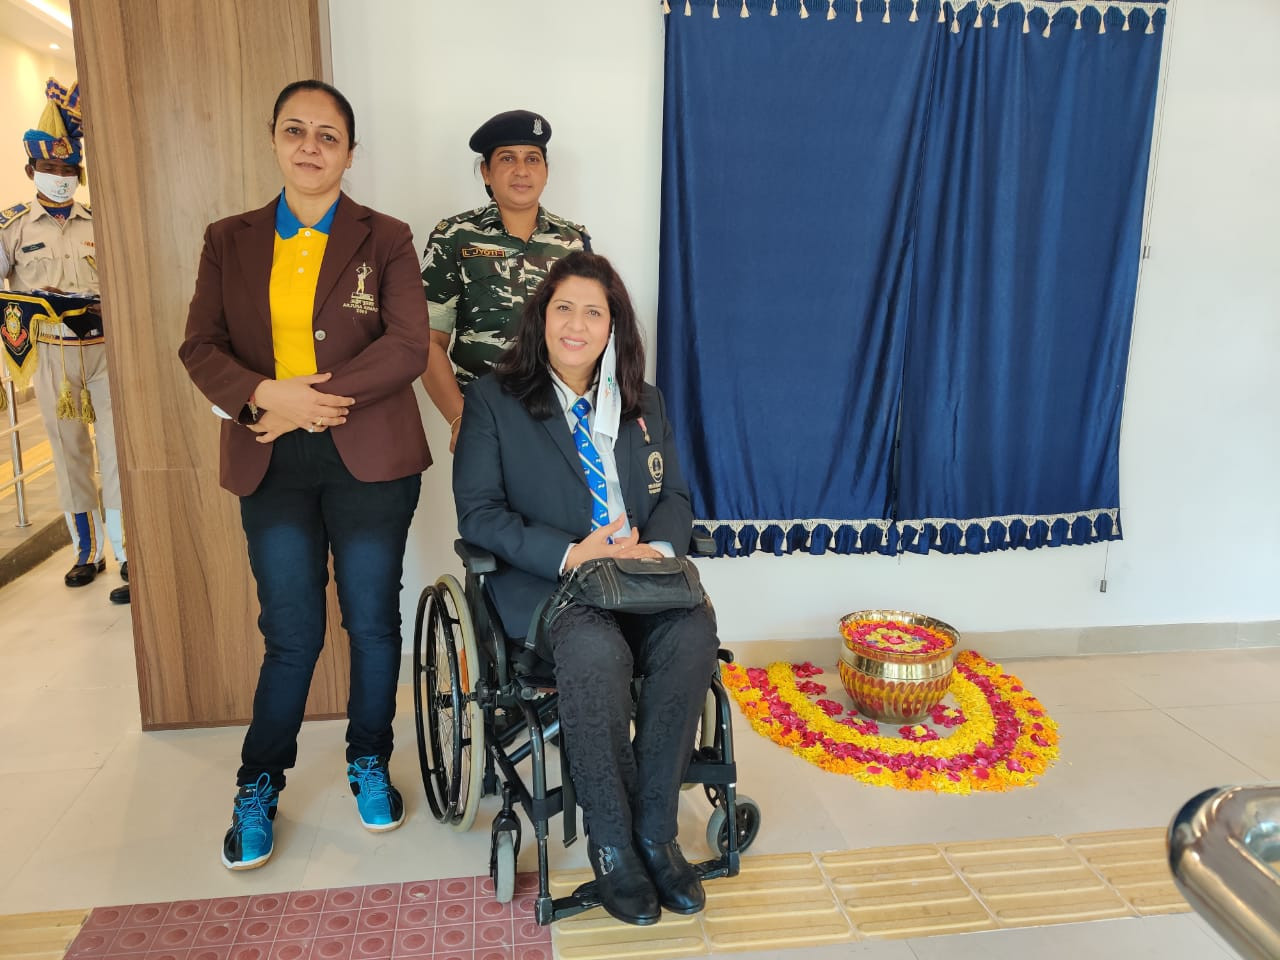 Paralympic Committee of India welcomes new sports centre for wounded soldiers